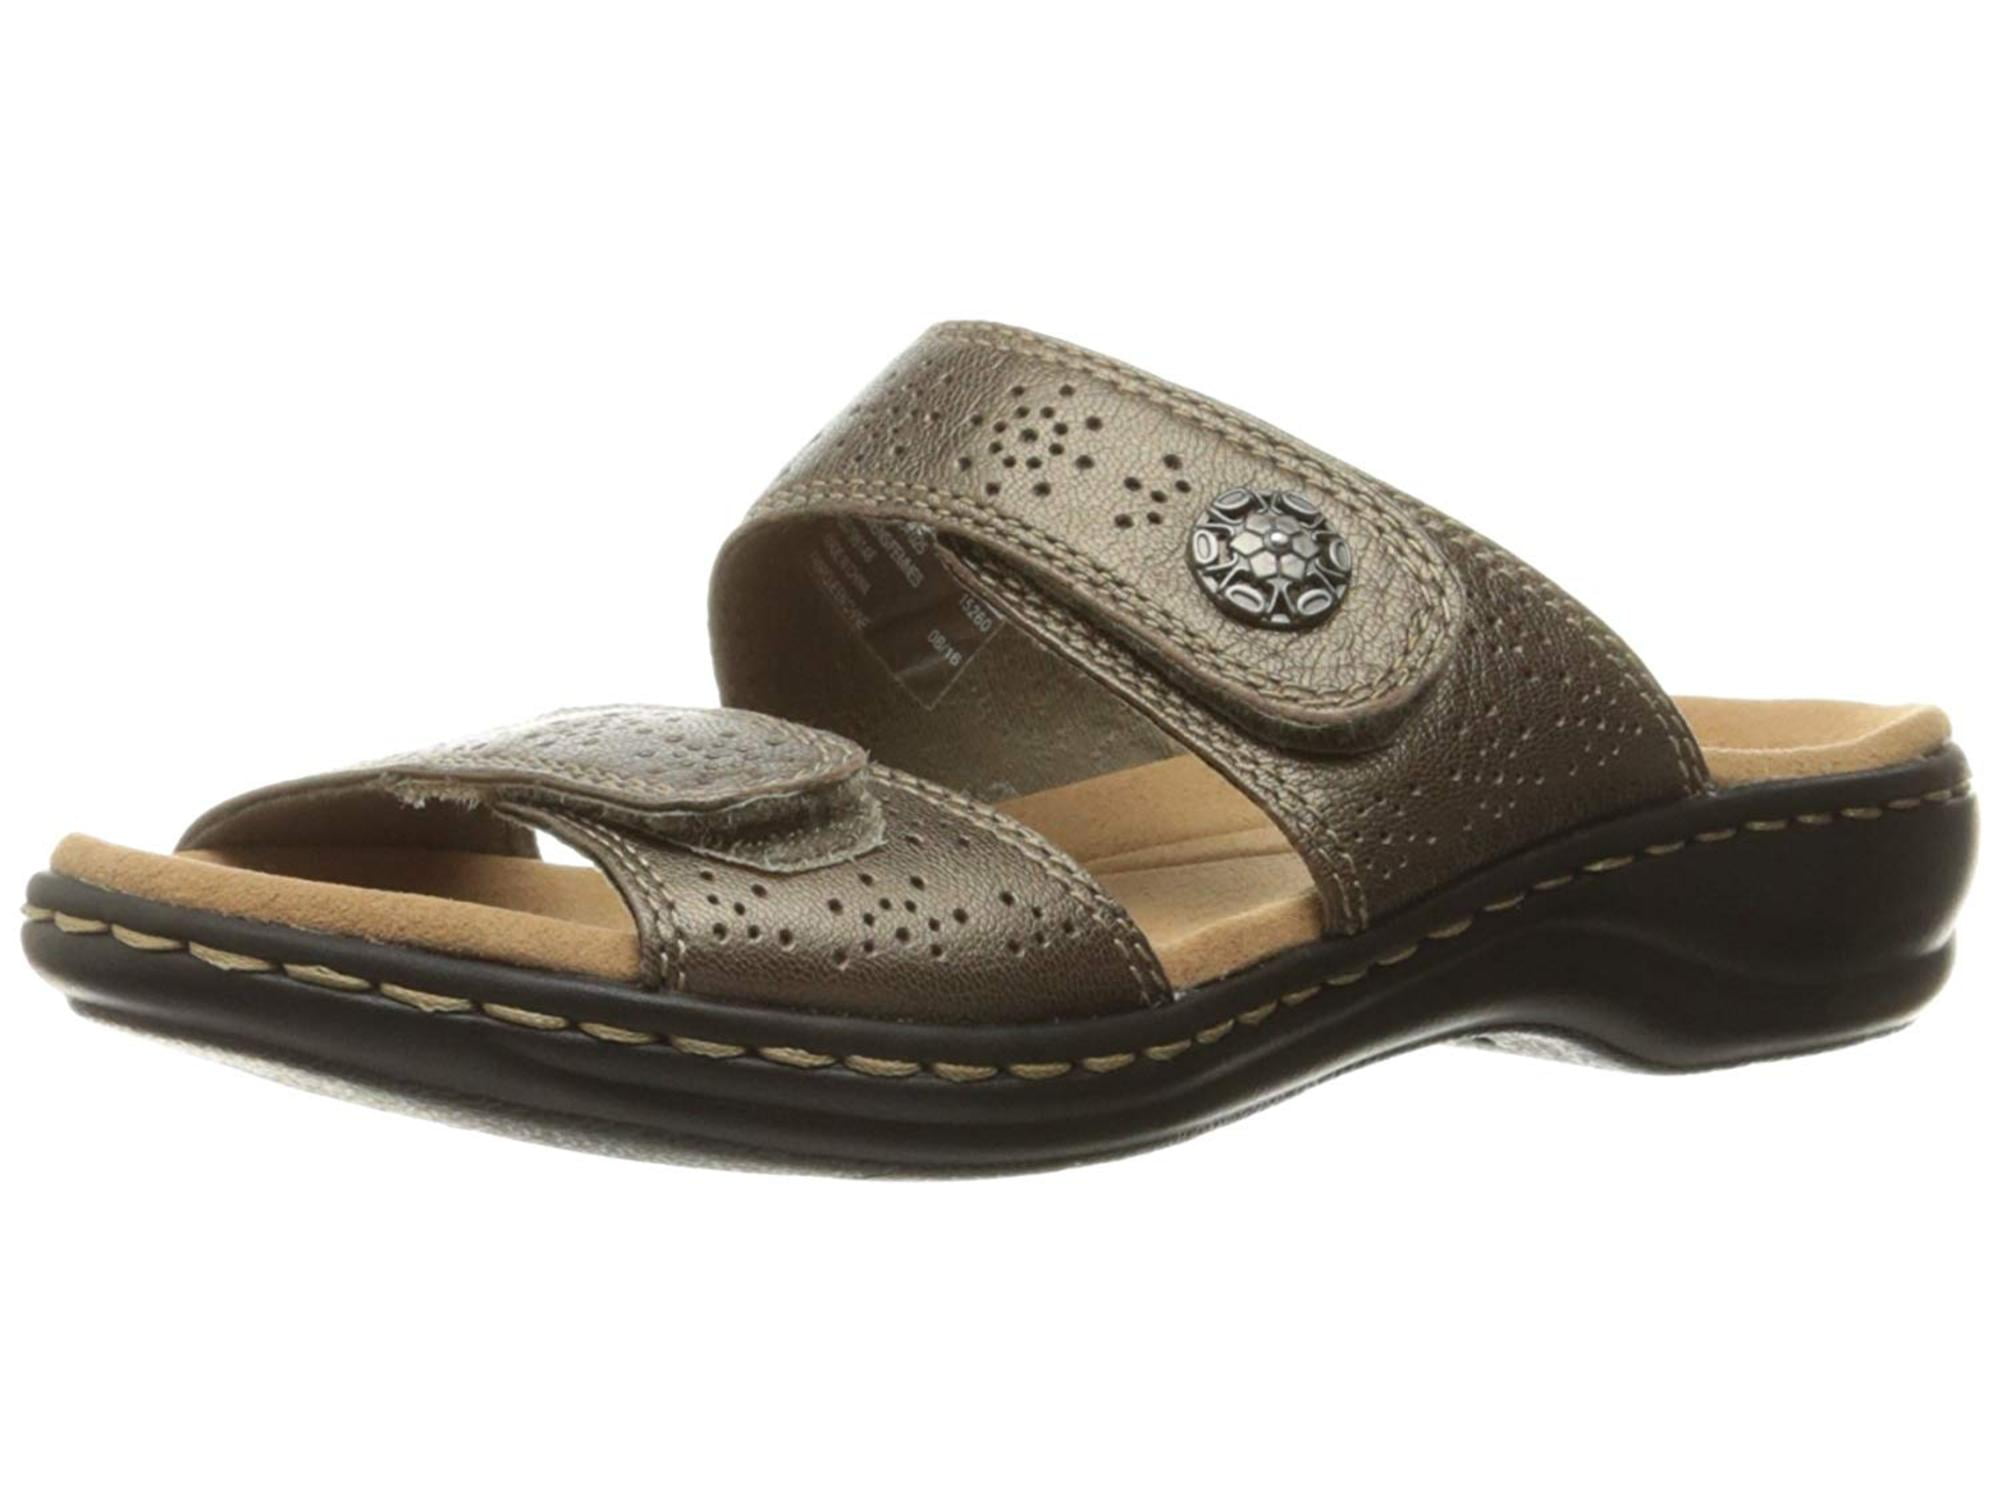 clarks summer shoes for women